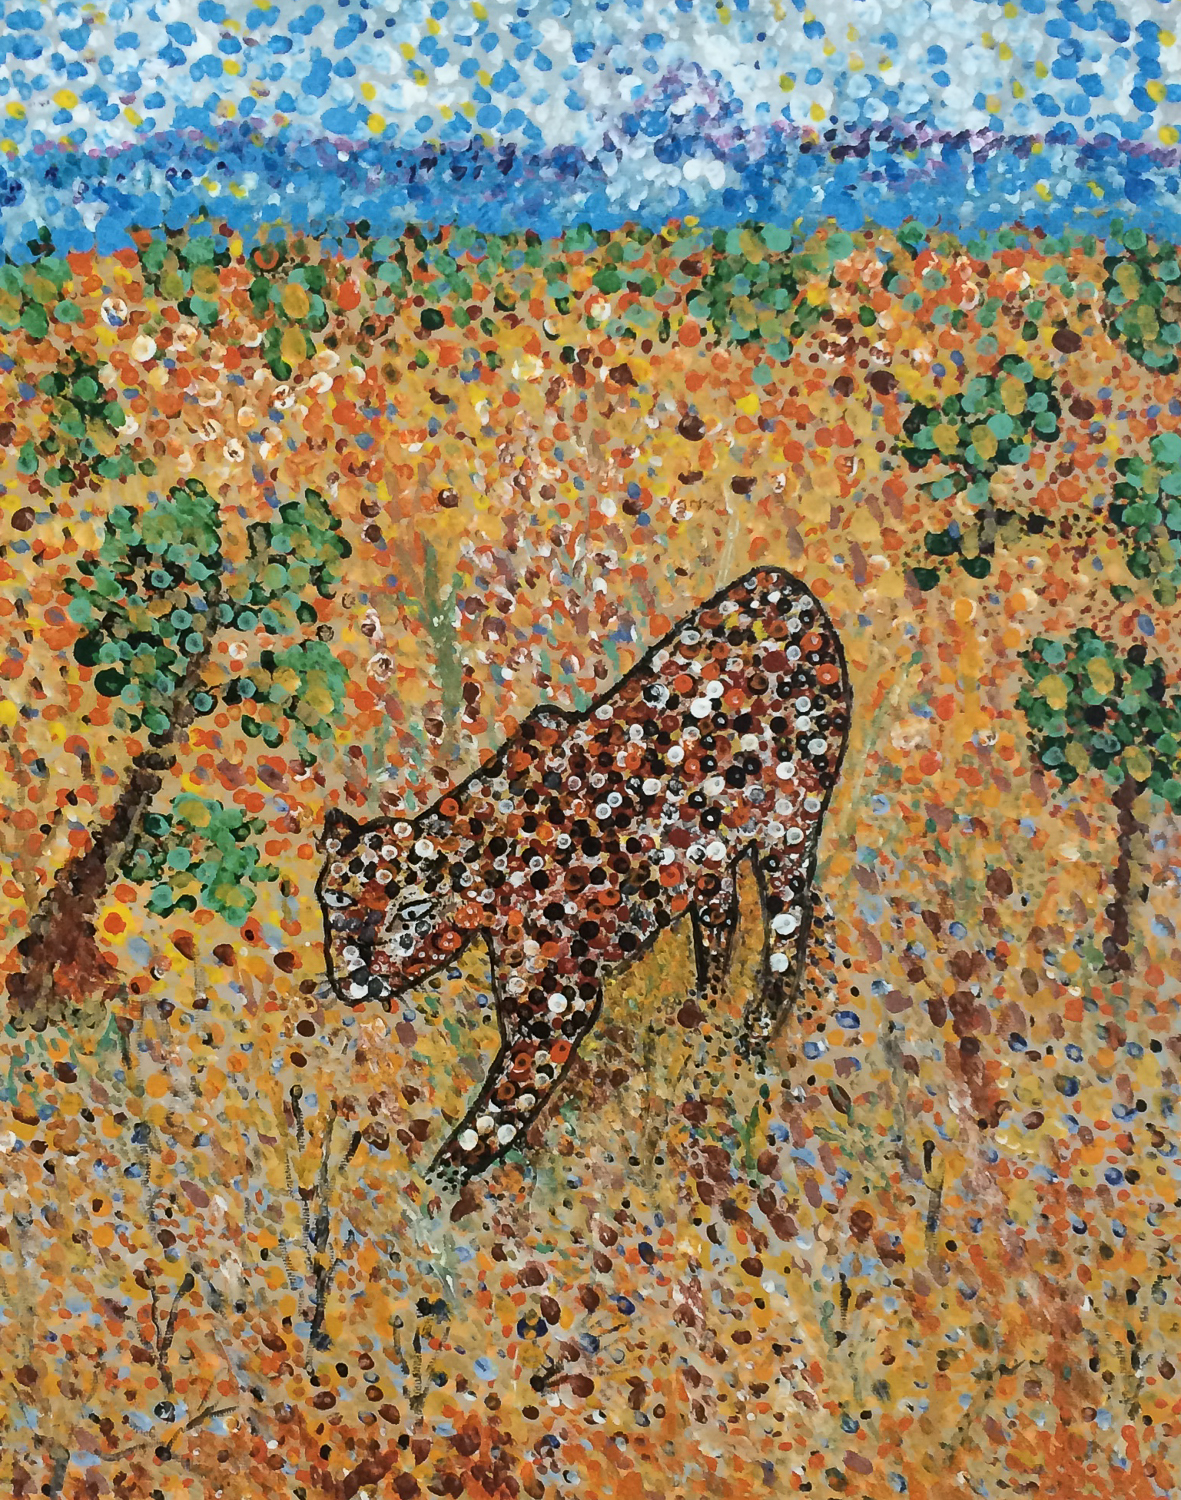 Painting of a Leopard